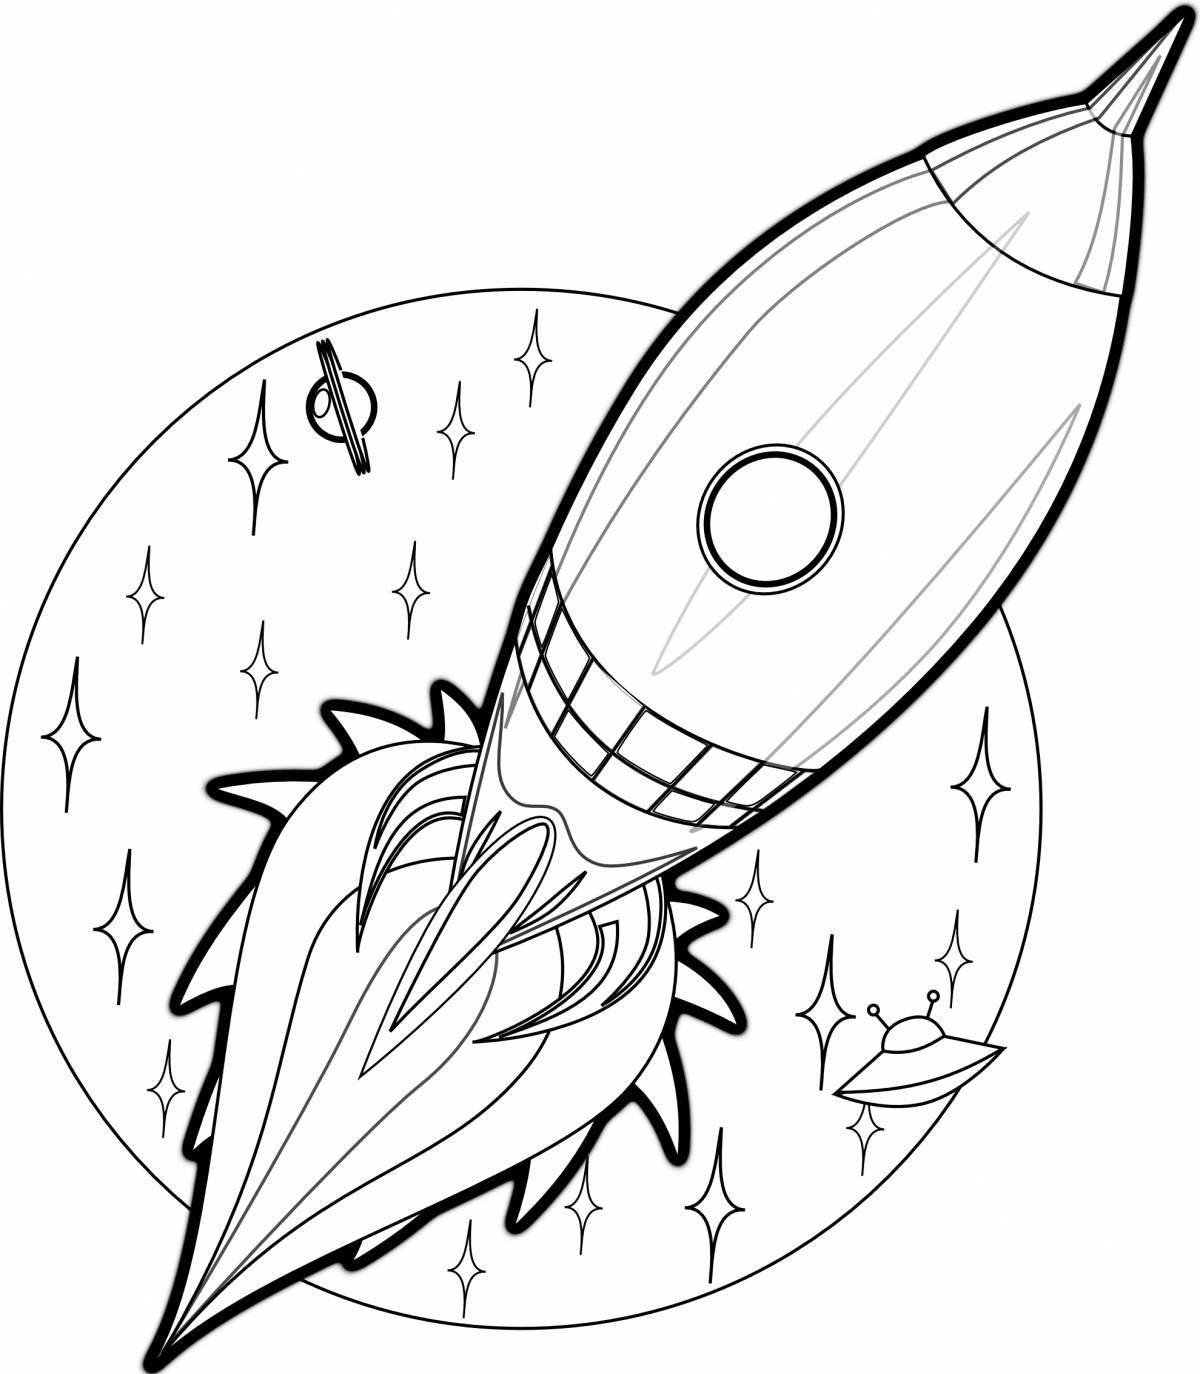 Exquisite rocket coloring book for boys